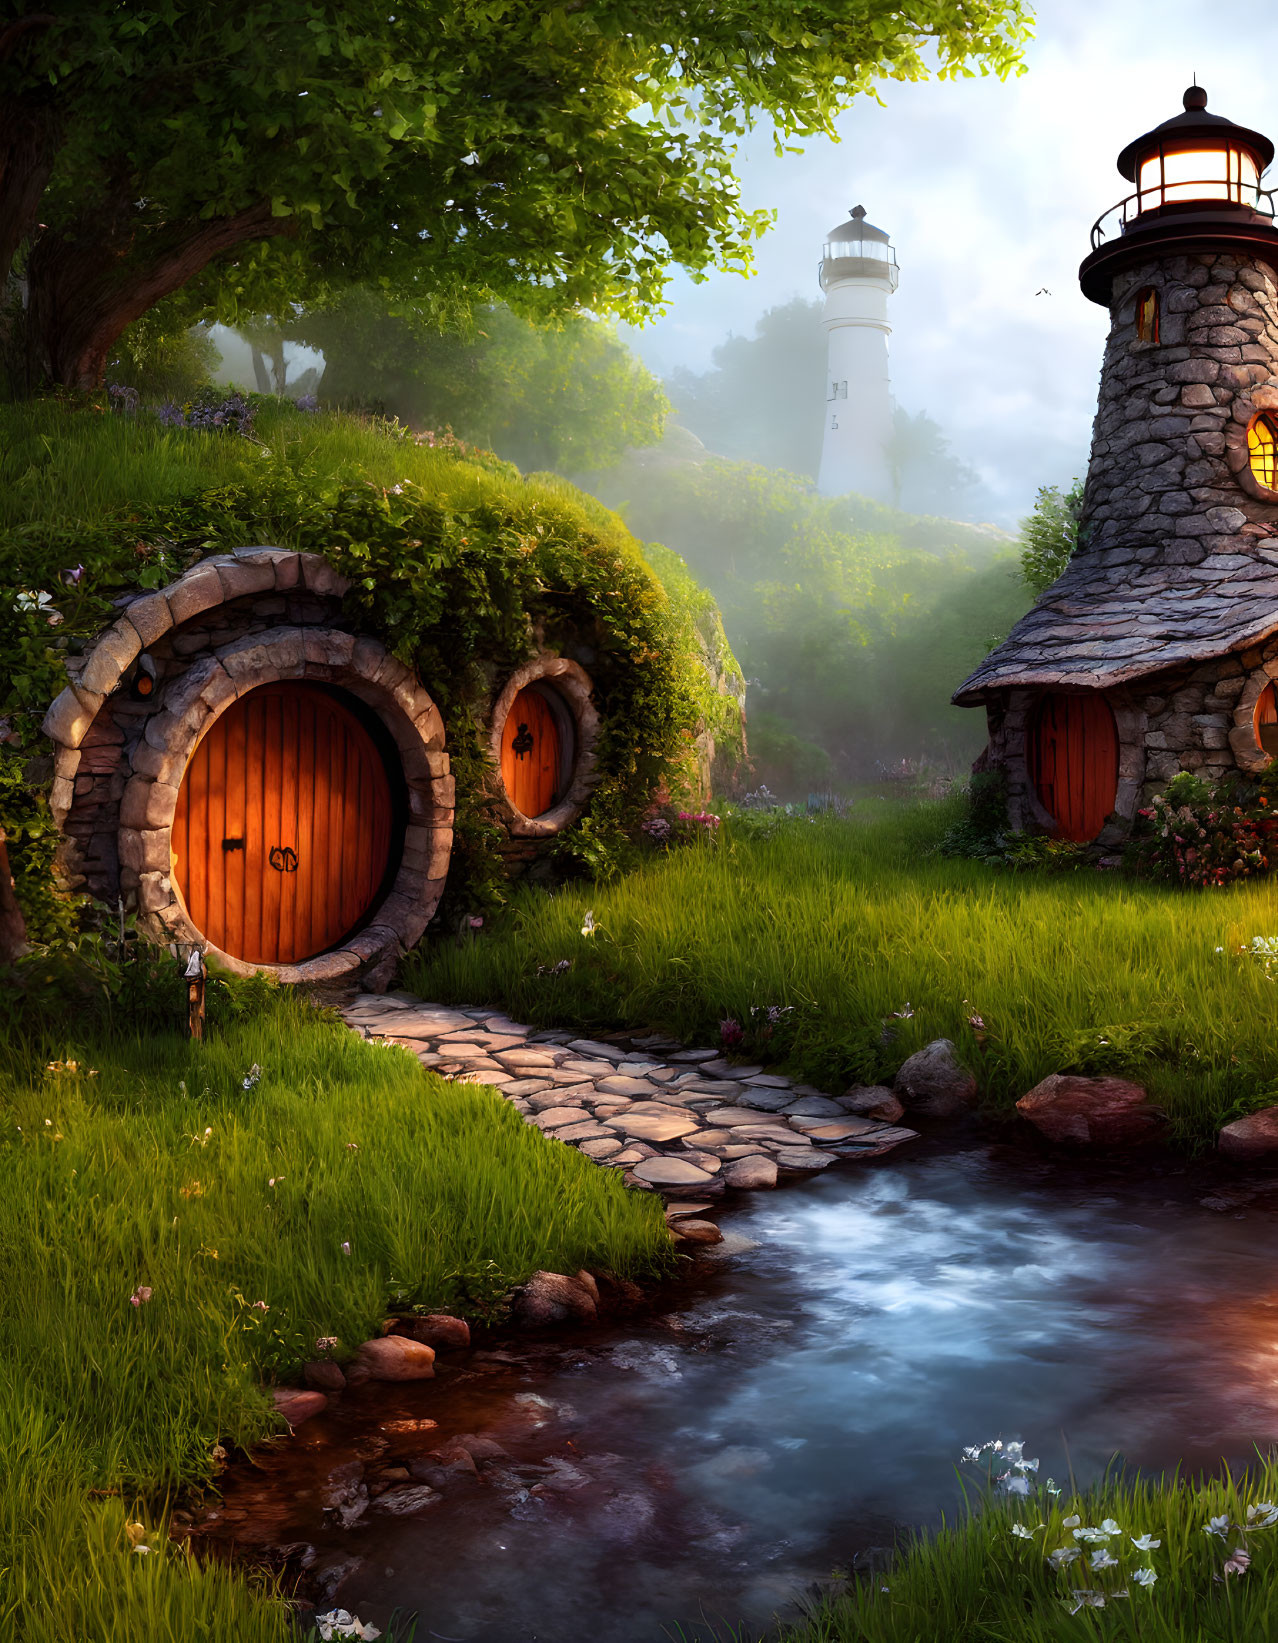 Fantasy setting with hobbit-like houses, lush greenery, stream, and distant lighthouse